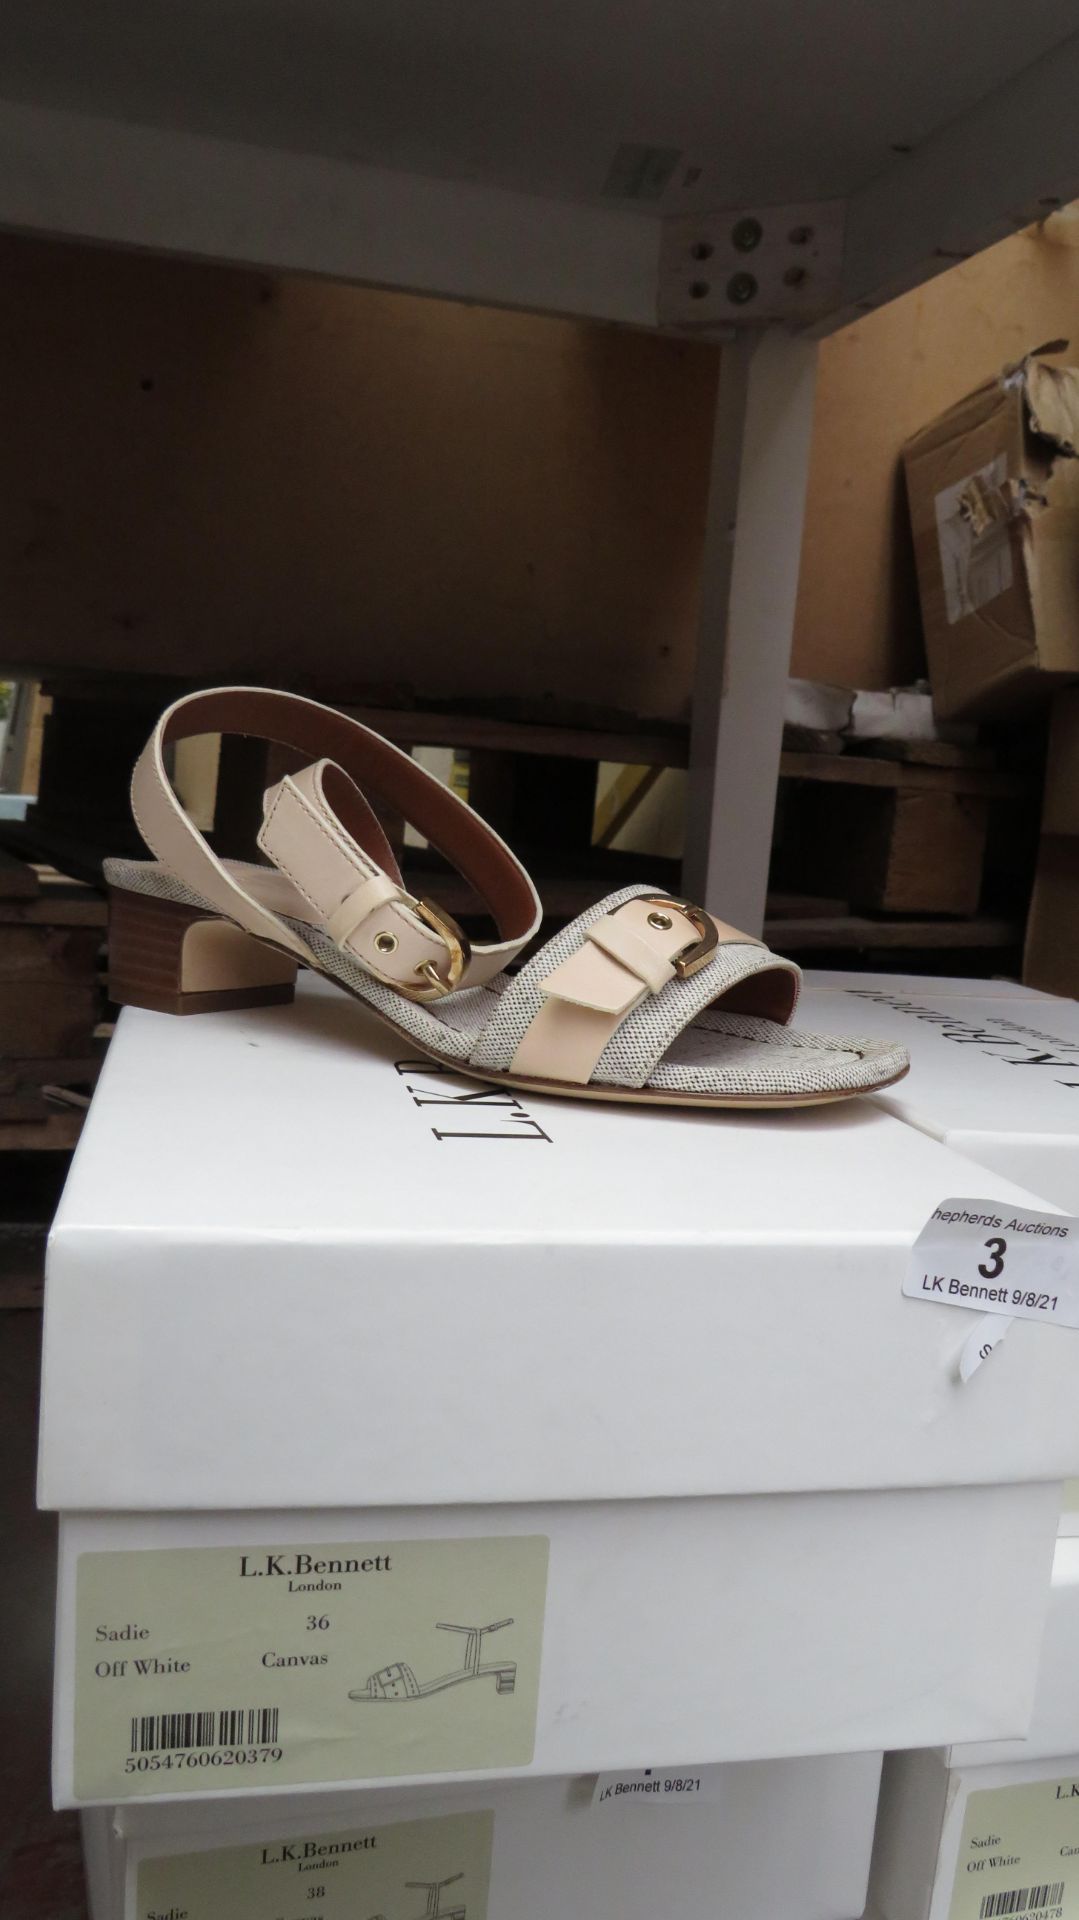 L K Bennett London Sadie Off White Canvas Sandals size 38 RRP £195 new & boxed see image for design